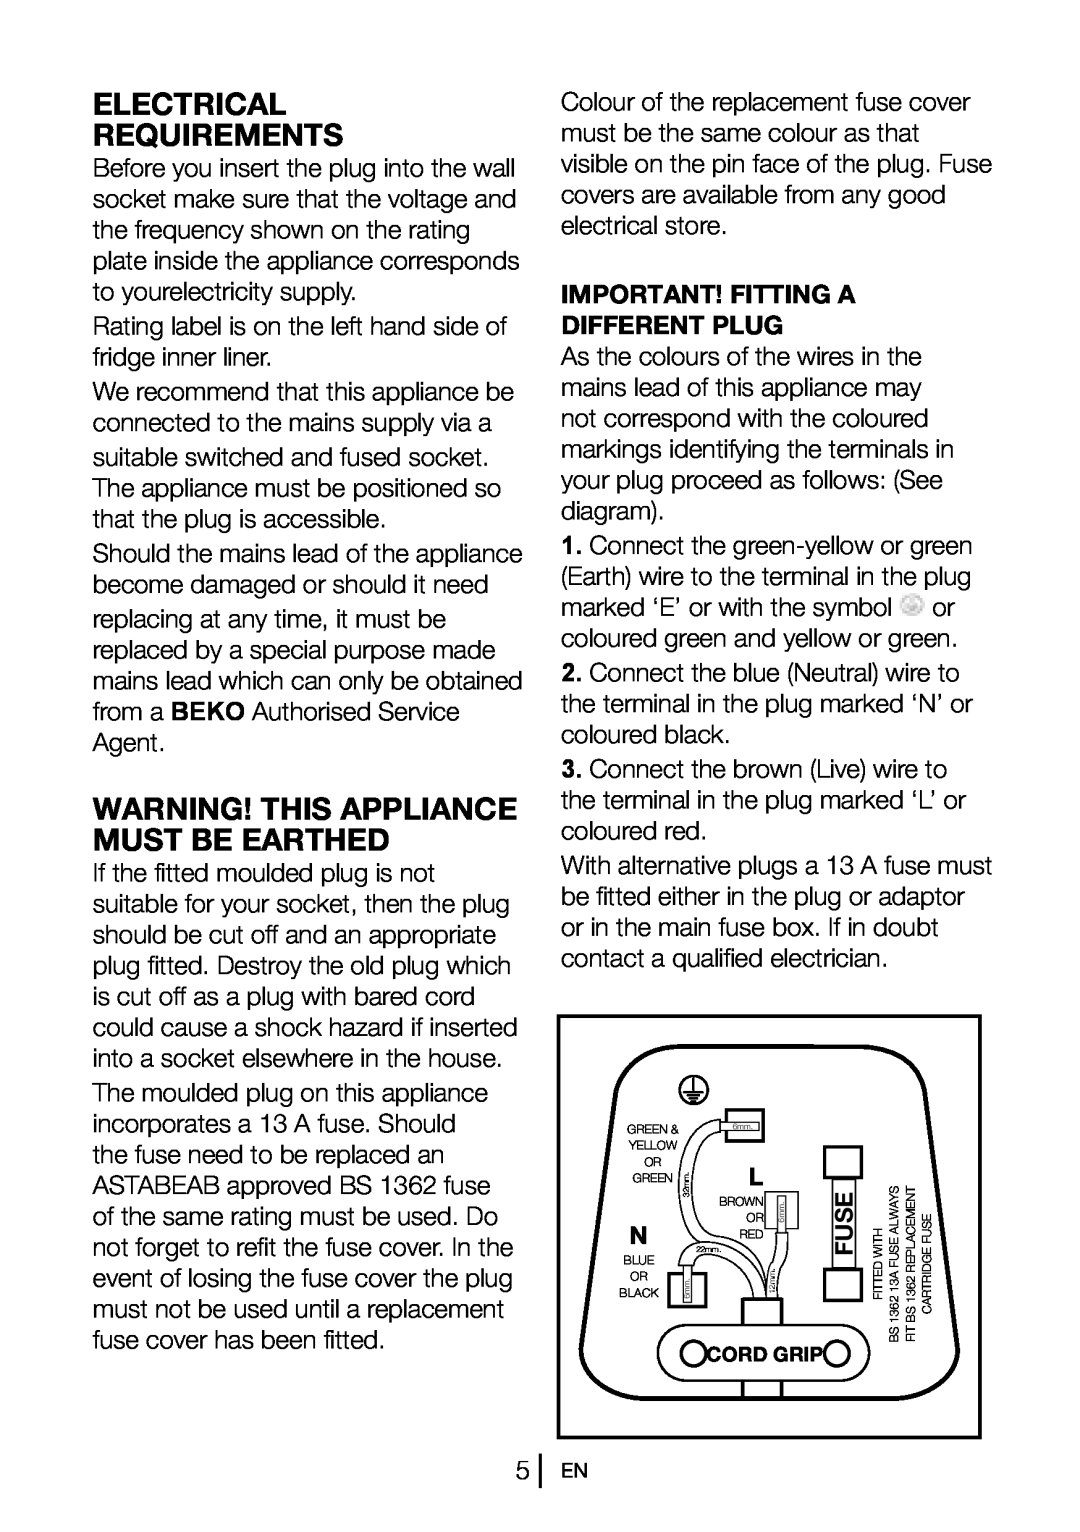 Beko COOL54FW Electrical Requirements, Warning! This Appliance Must Be Earthed, Important! Fitting A Different Plug, Fuse 